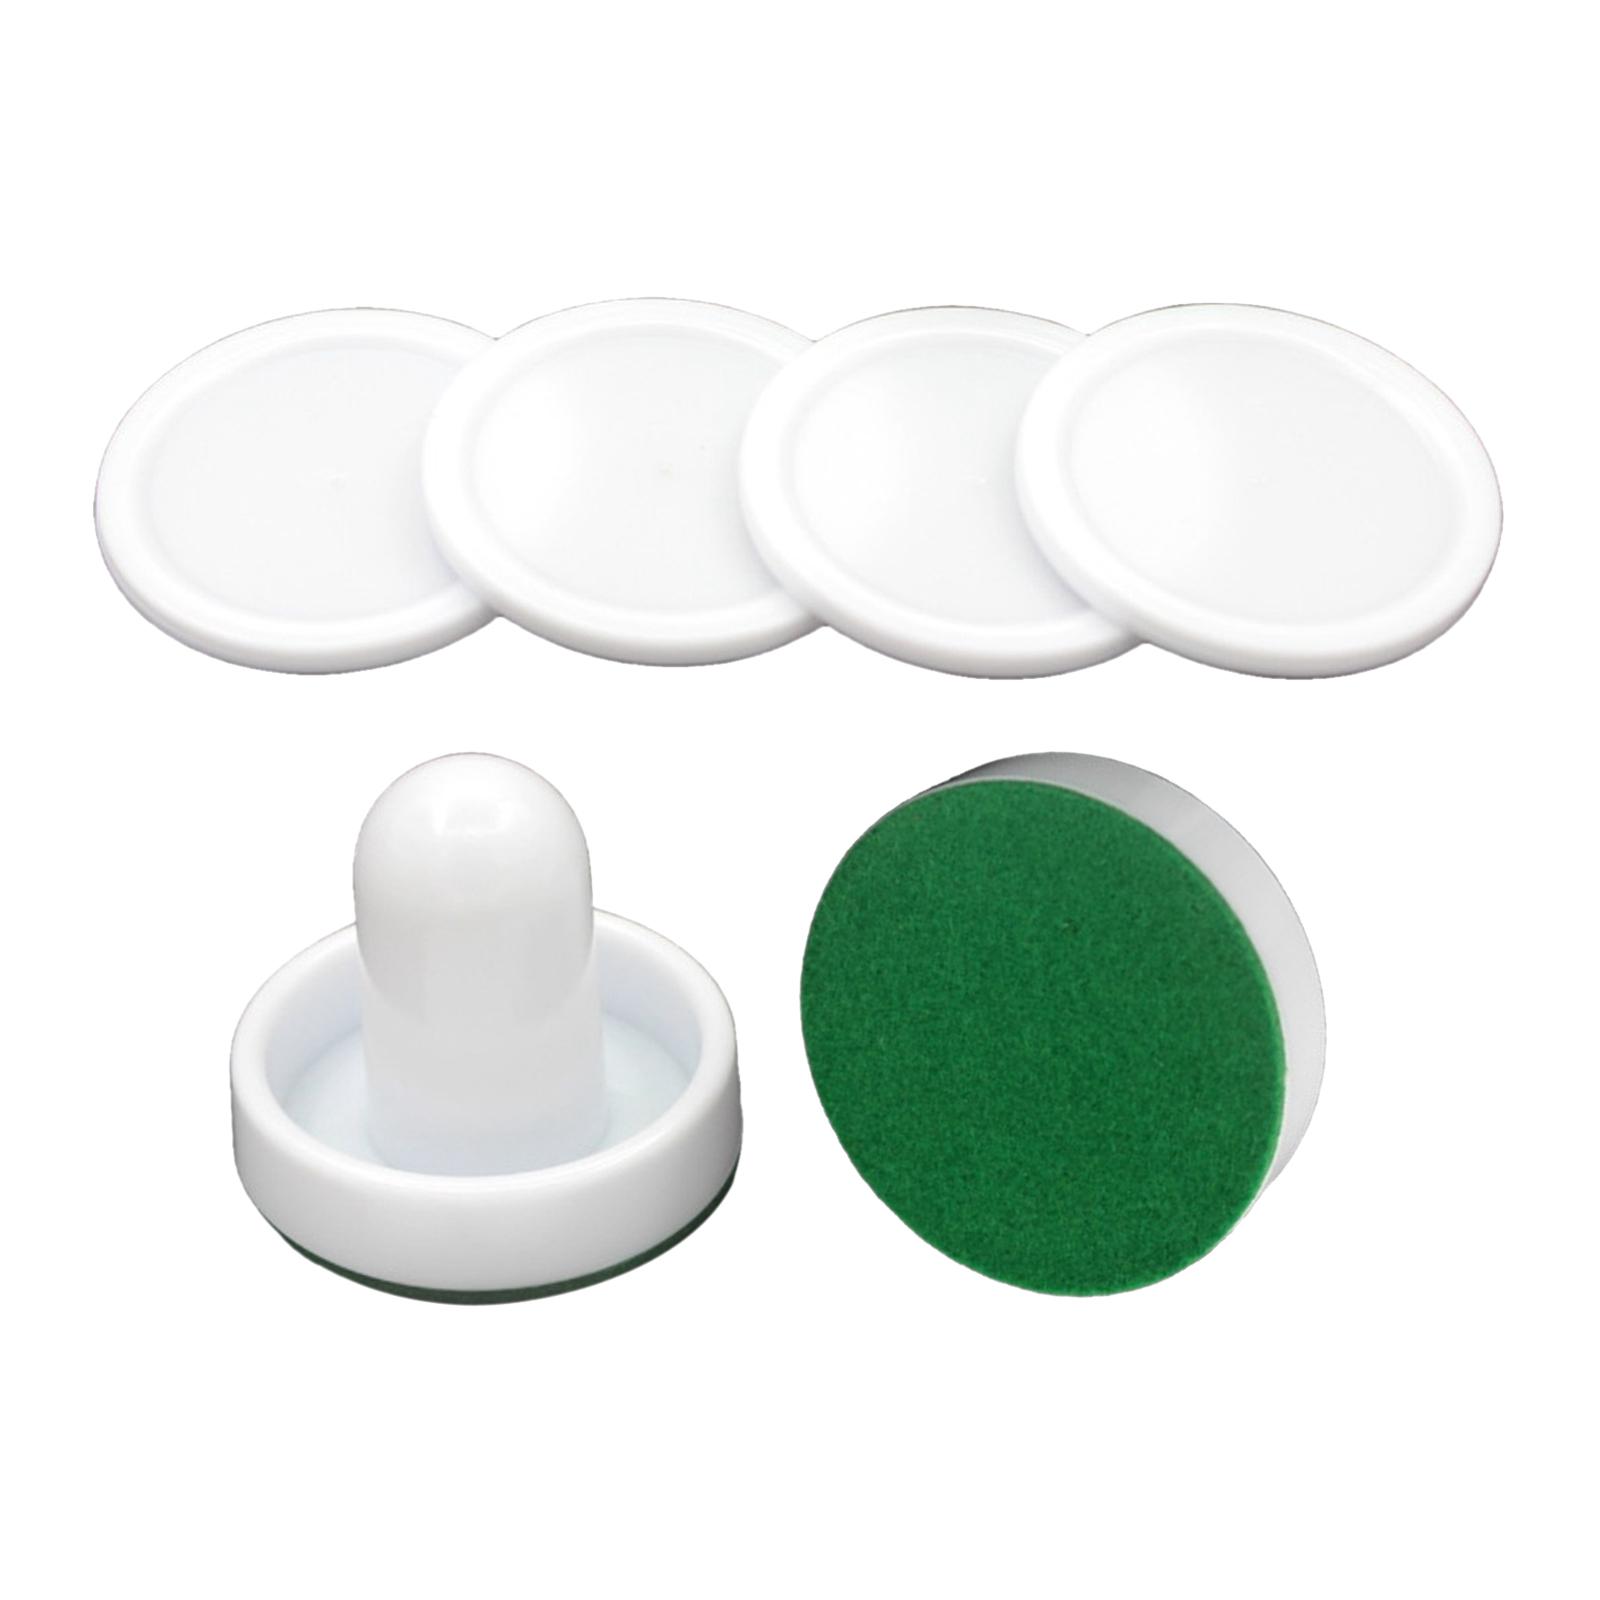 2PCS Plastic Air Hockey Pushers and 4PCS Pucks Replacement for Game Tables White